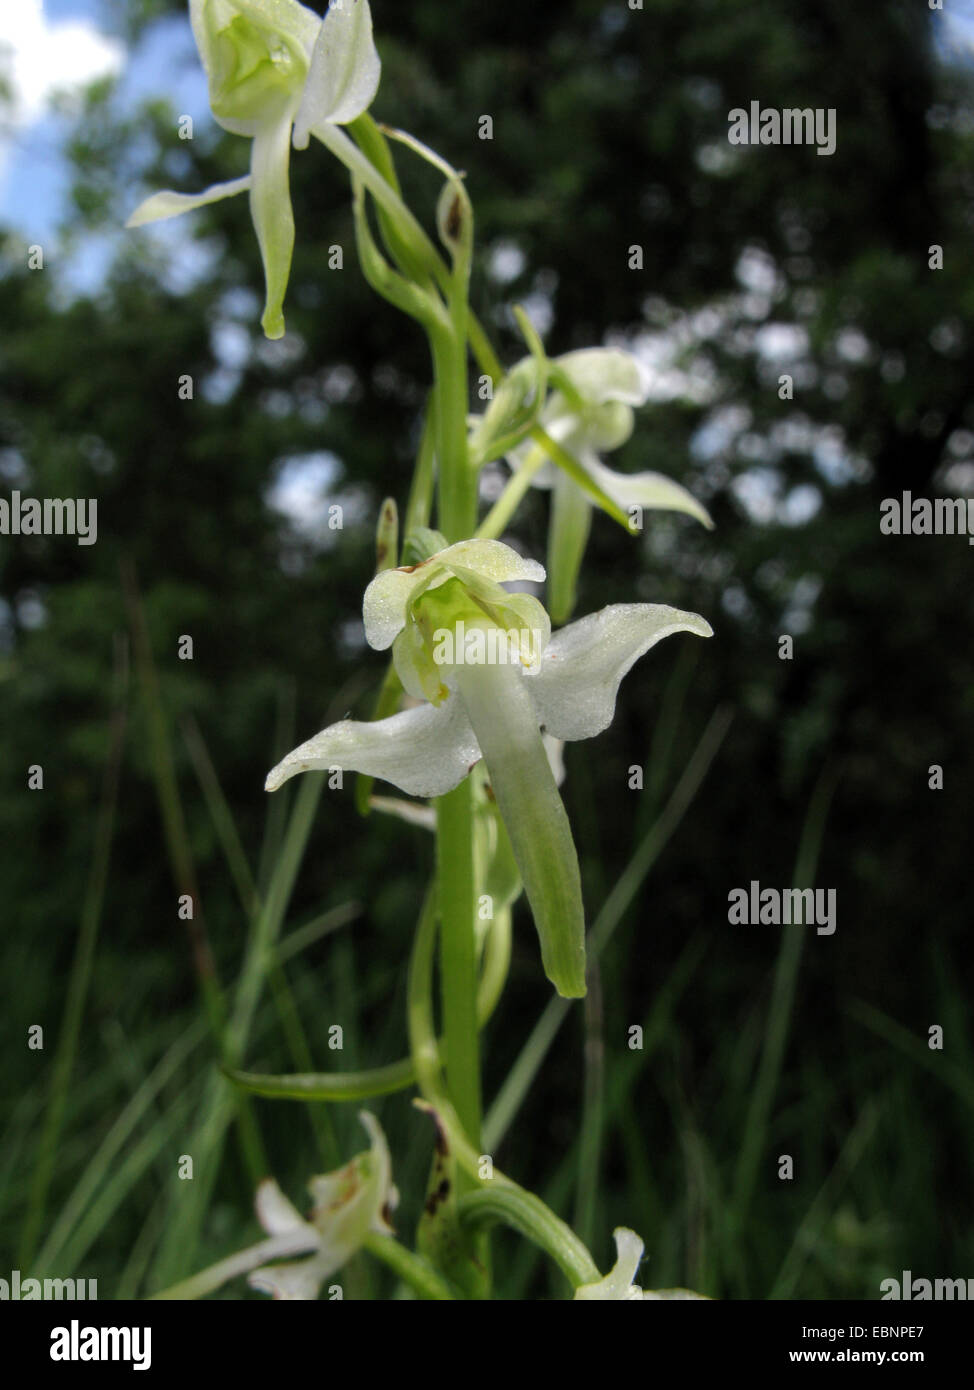 greater butterfly-orchid (Platanthera chlorantha), flower, Germany, North Rhine-Westphalia Stock Photo